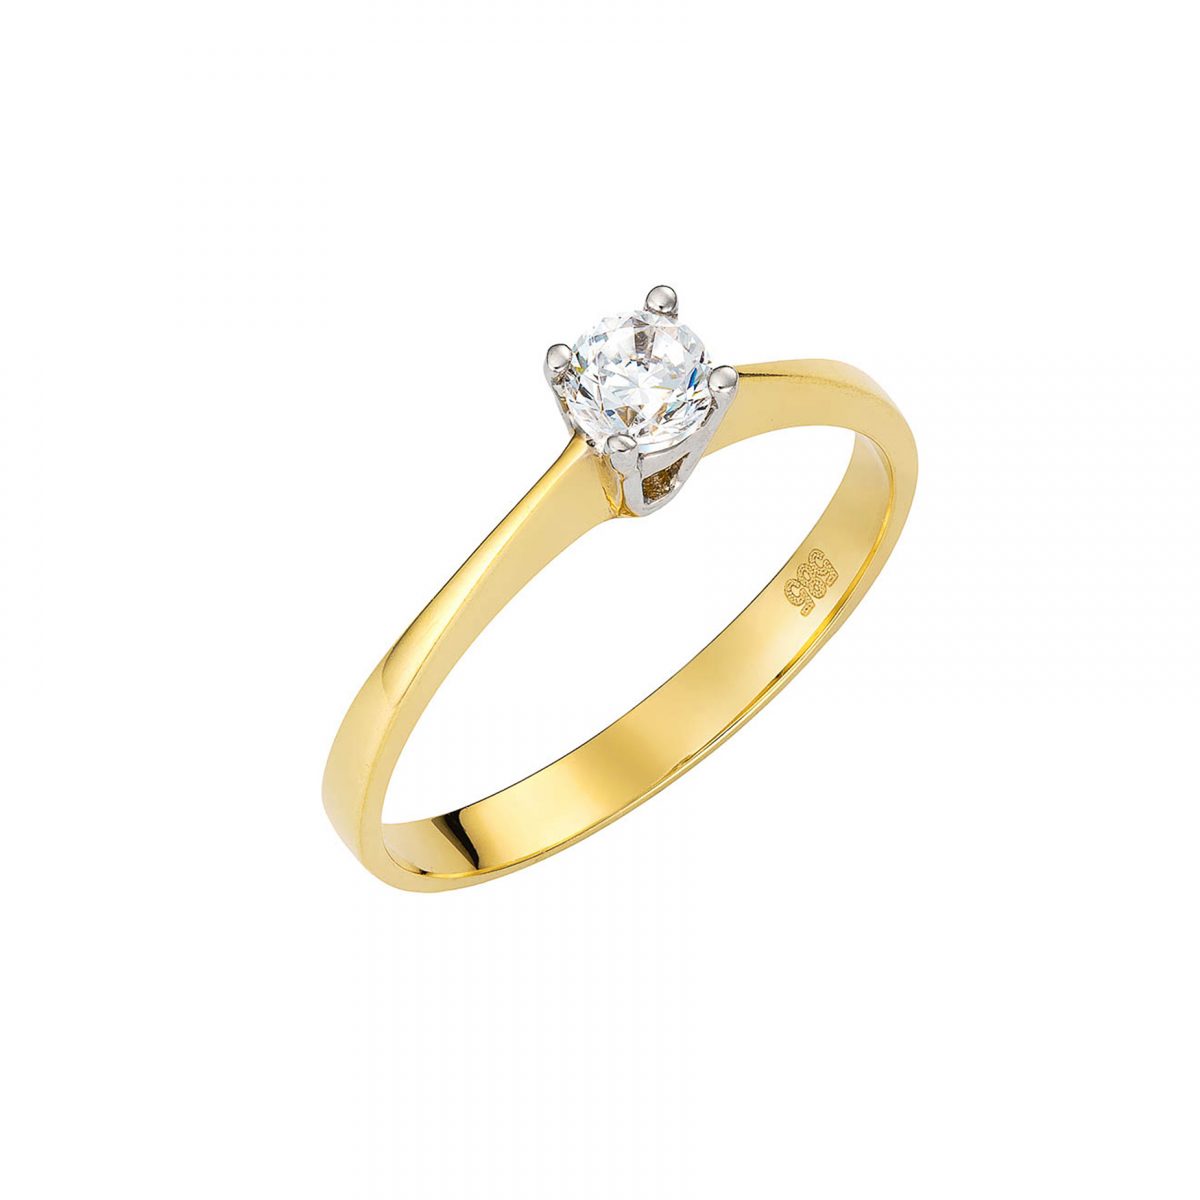 Ring Golden Solitaire